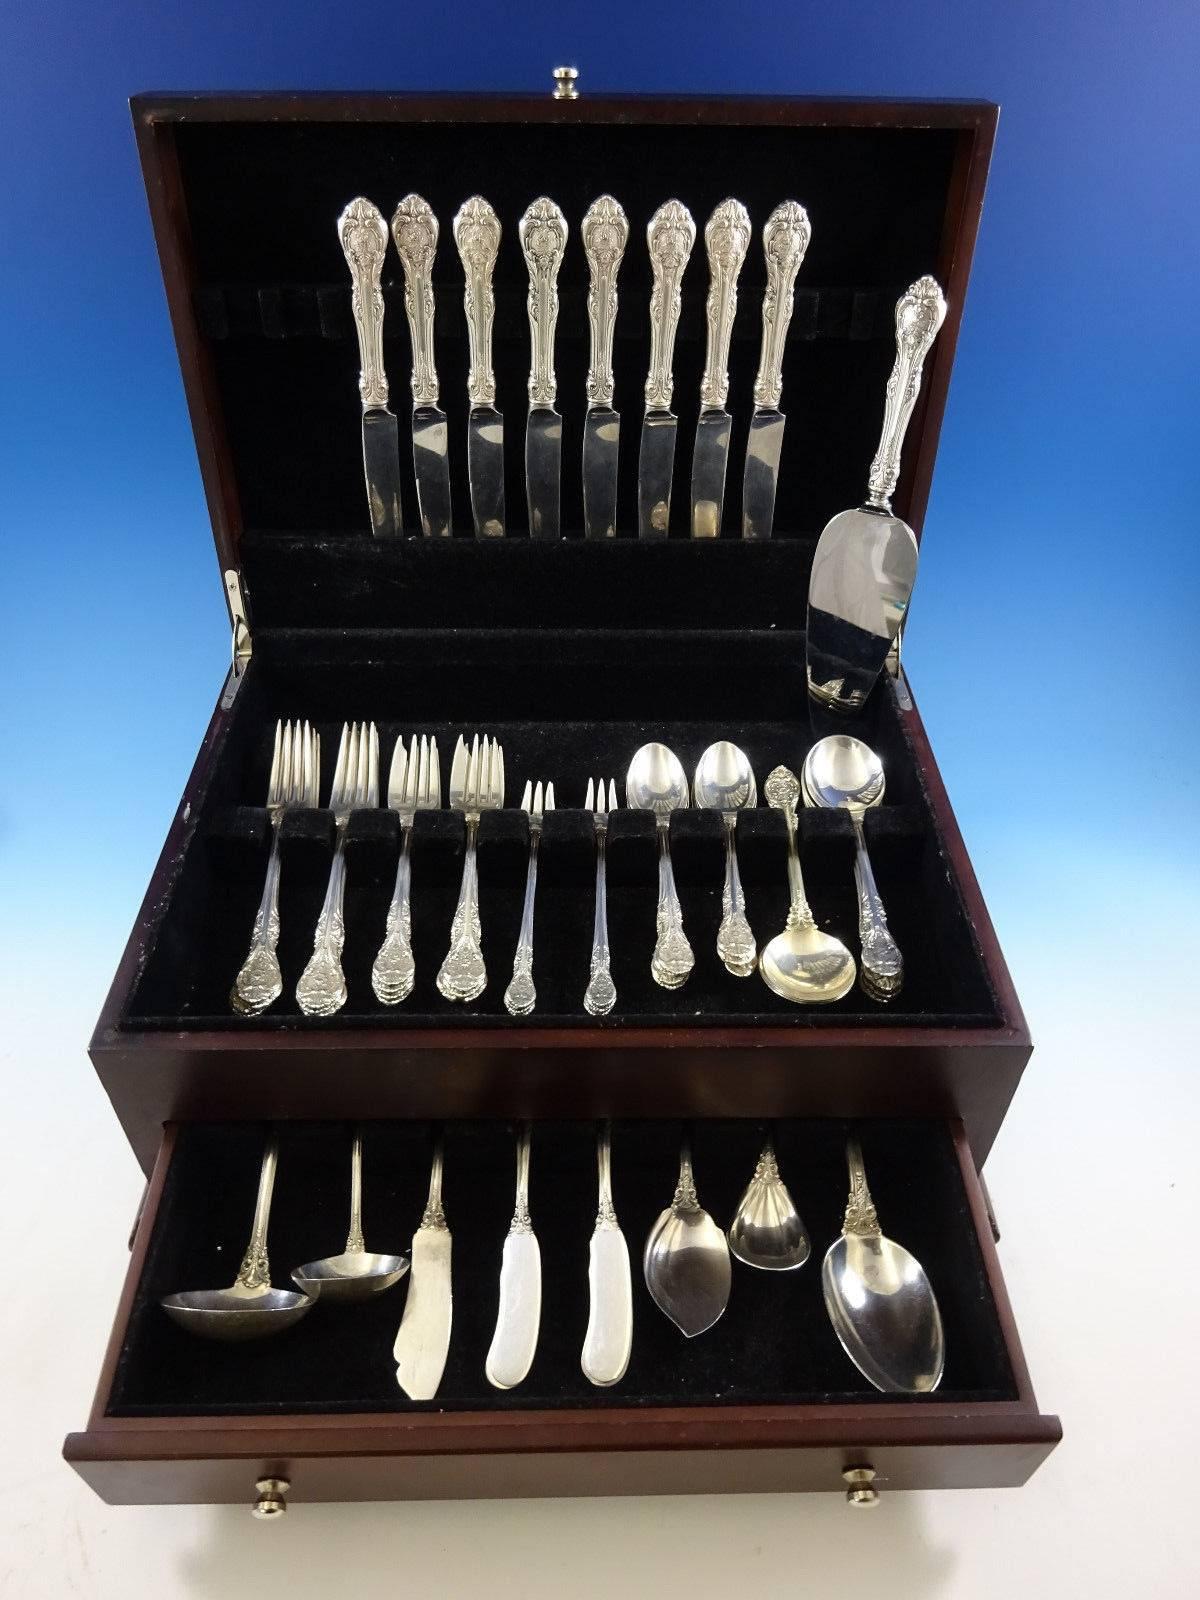 King Edward by Gorham sterling silver flatware set 63 pieces. This set includes: Eight knives, 8 7/8", eight forks, 7", eight salad forks, 6 1/4", eight teaspoons, 6", eight cream soup spoons, 6 1/4", eight flat handle